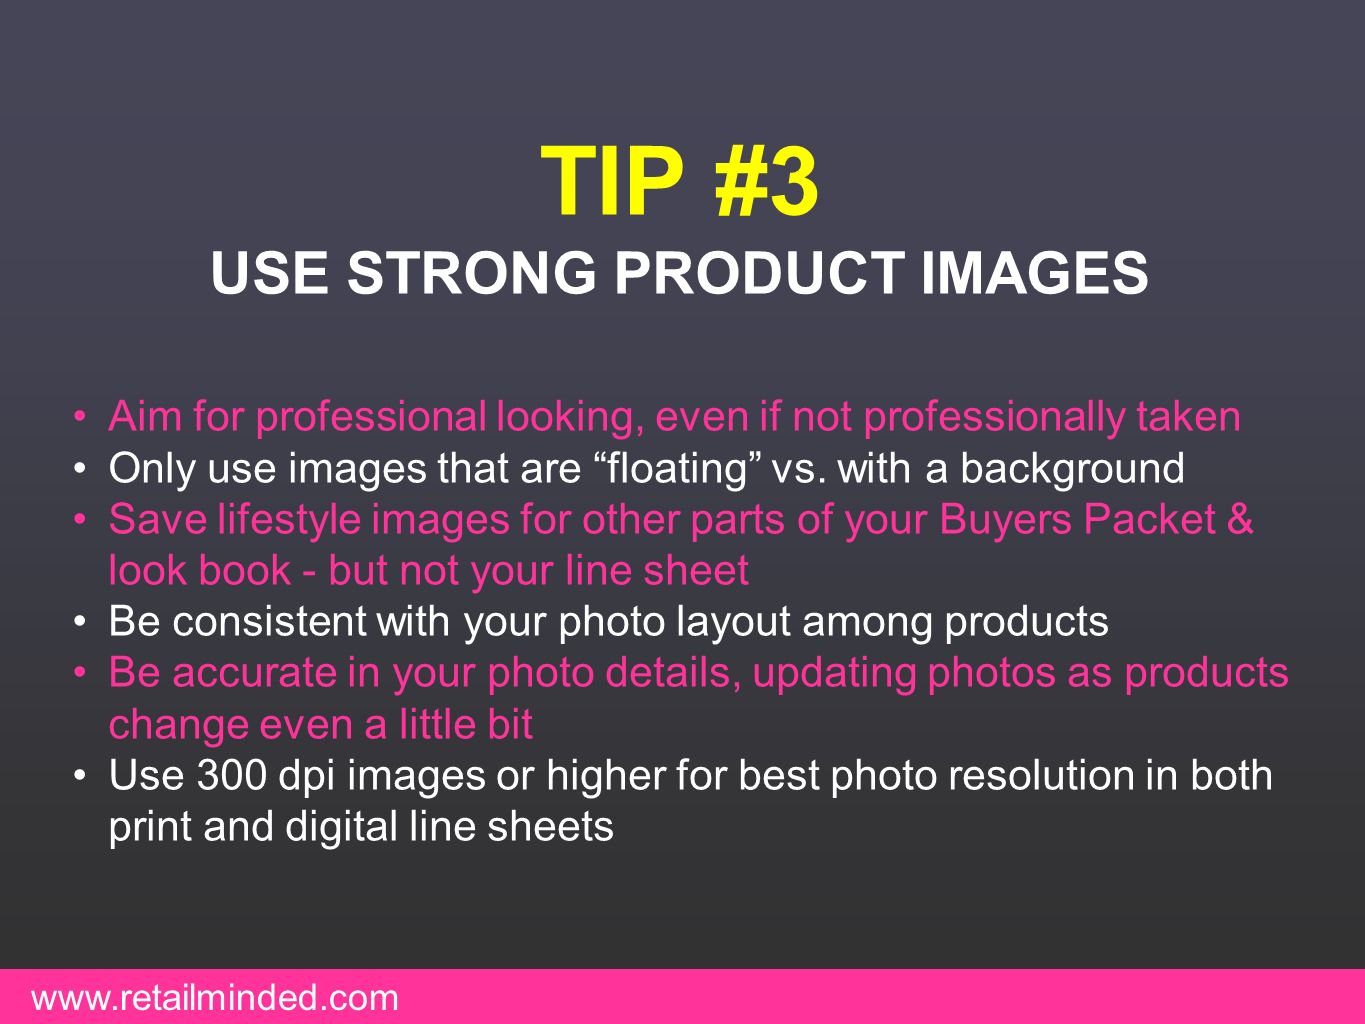 TIP #3 USE STRONG PRODUCT IMAGES